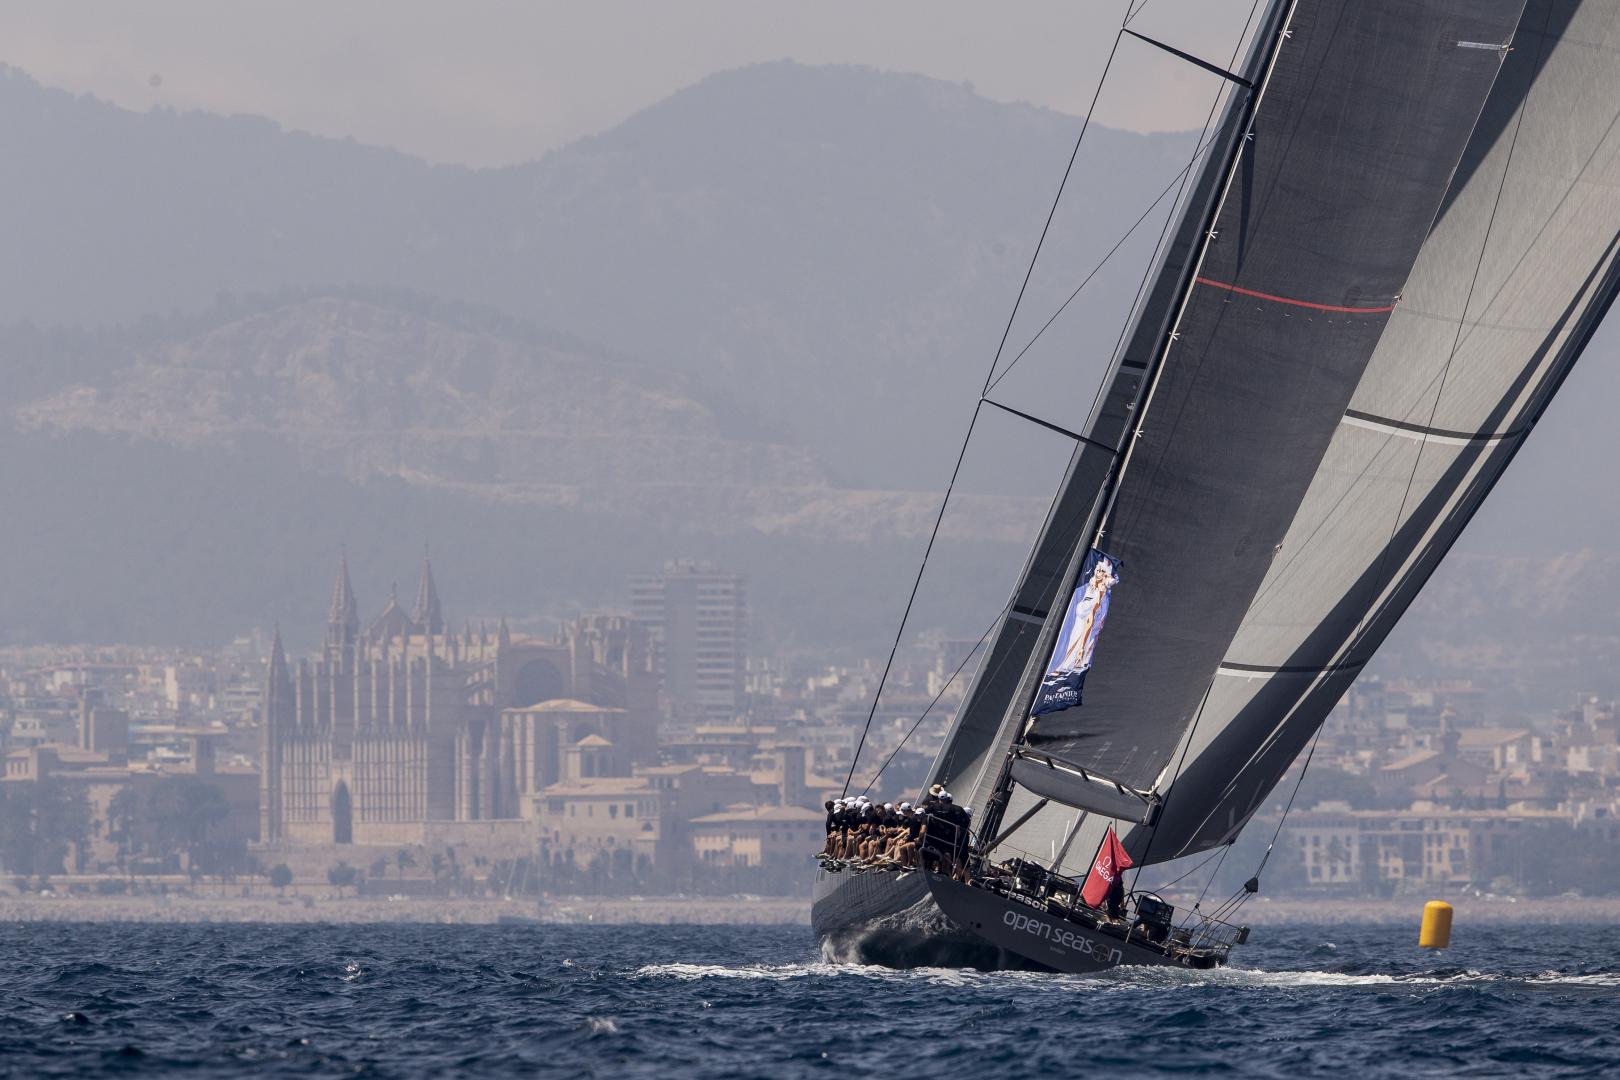 The Wallycento Open Season revels in the reliably strong breeze of the Bay of Palma 